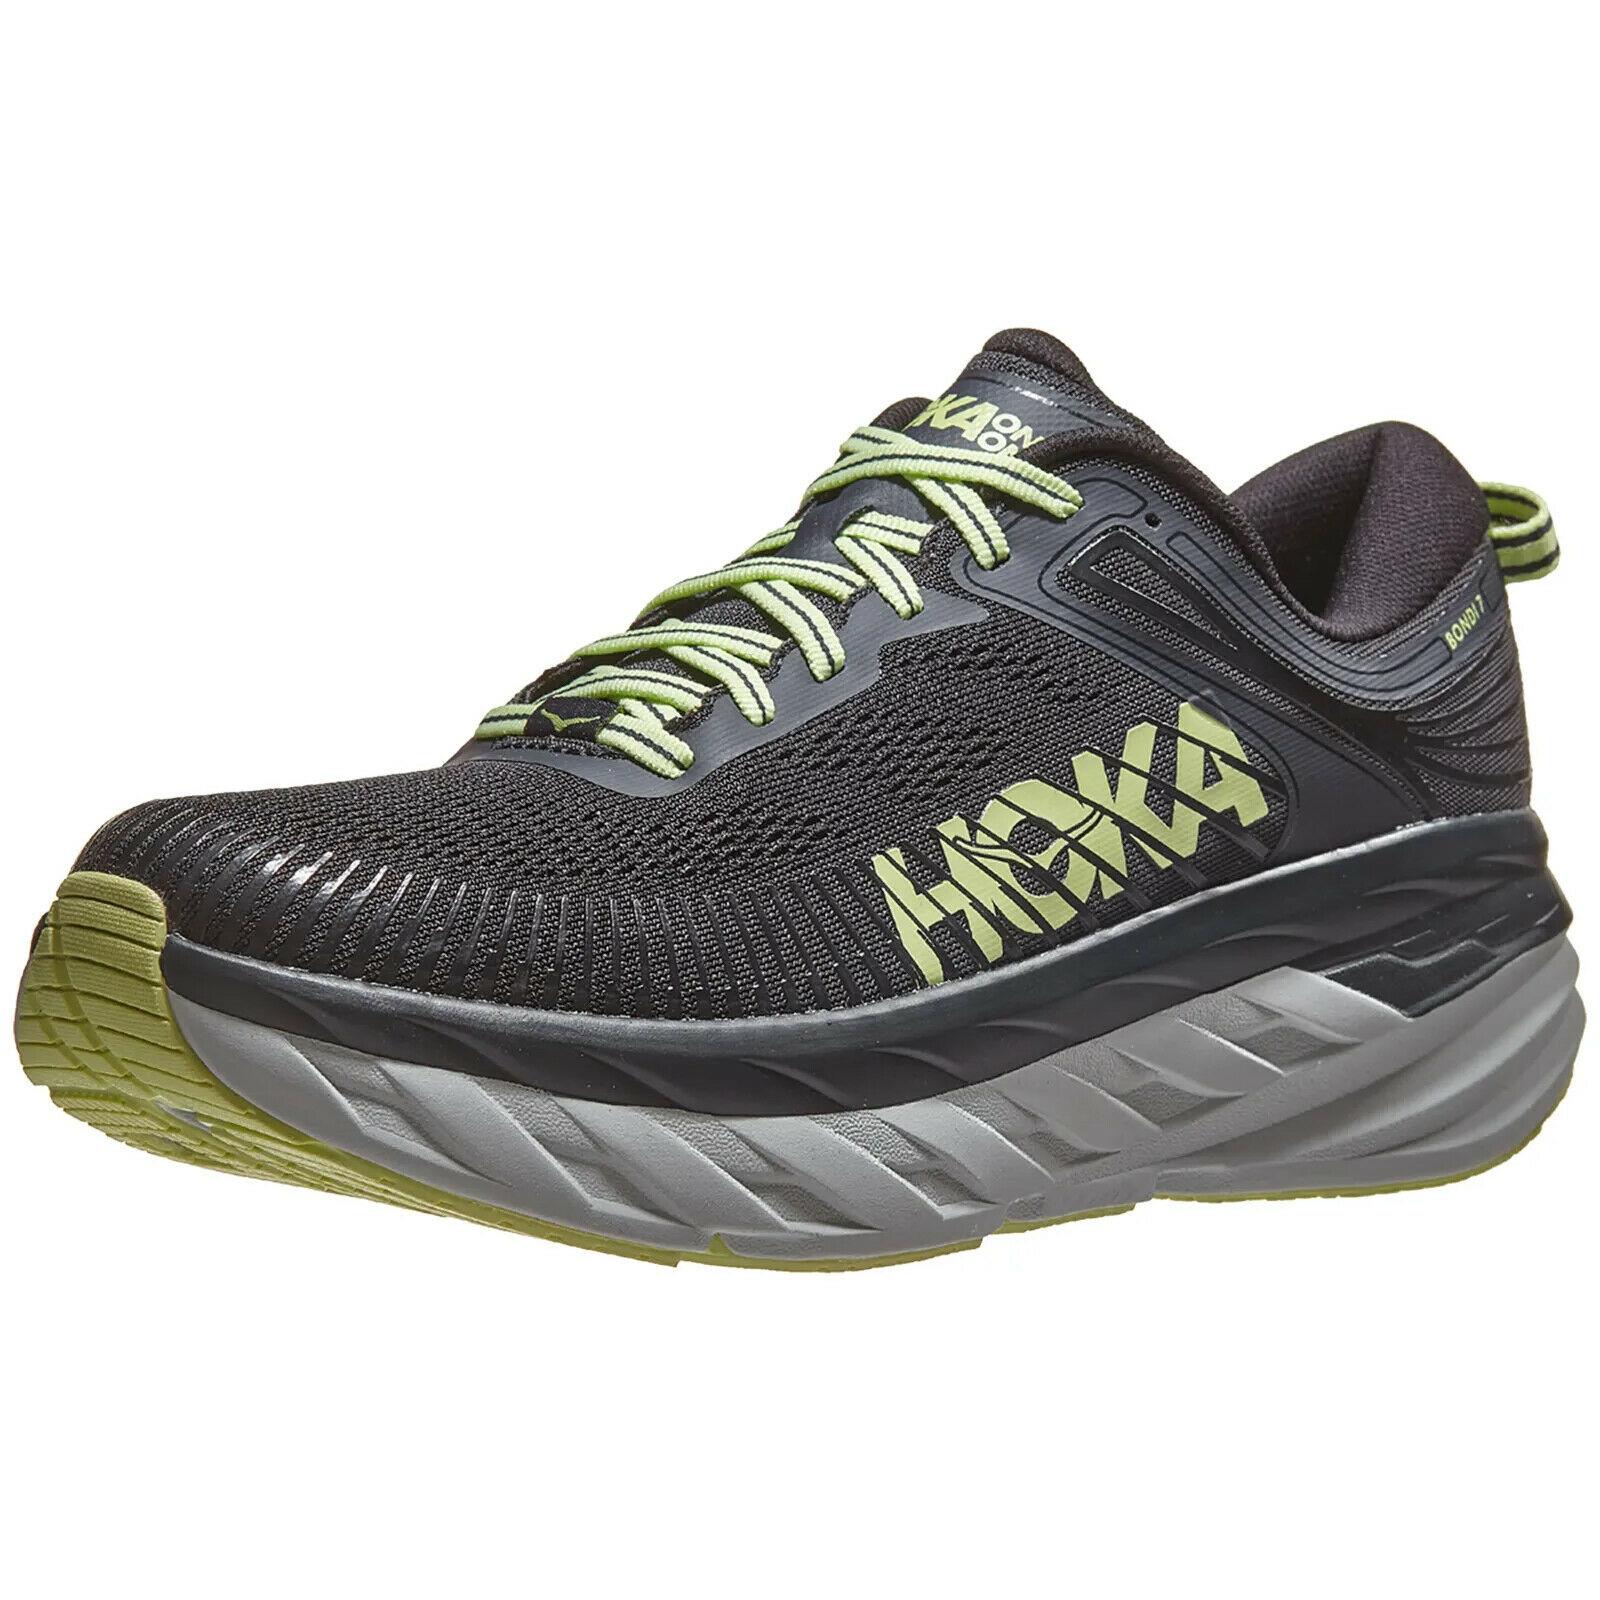 Hoka One One Bondi 7 Men`s Road Running Shoes Lightweight Cushioned Support Blue Graphite/Butterfly